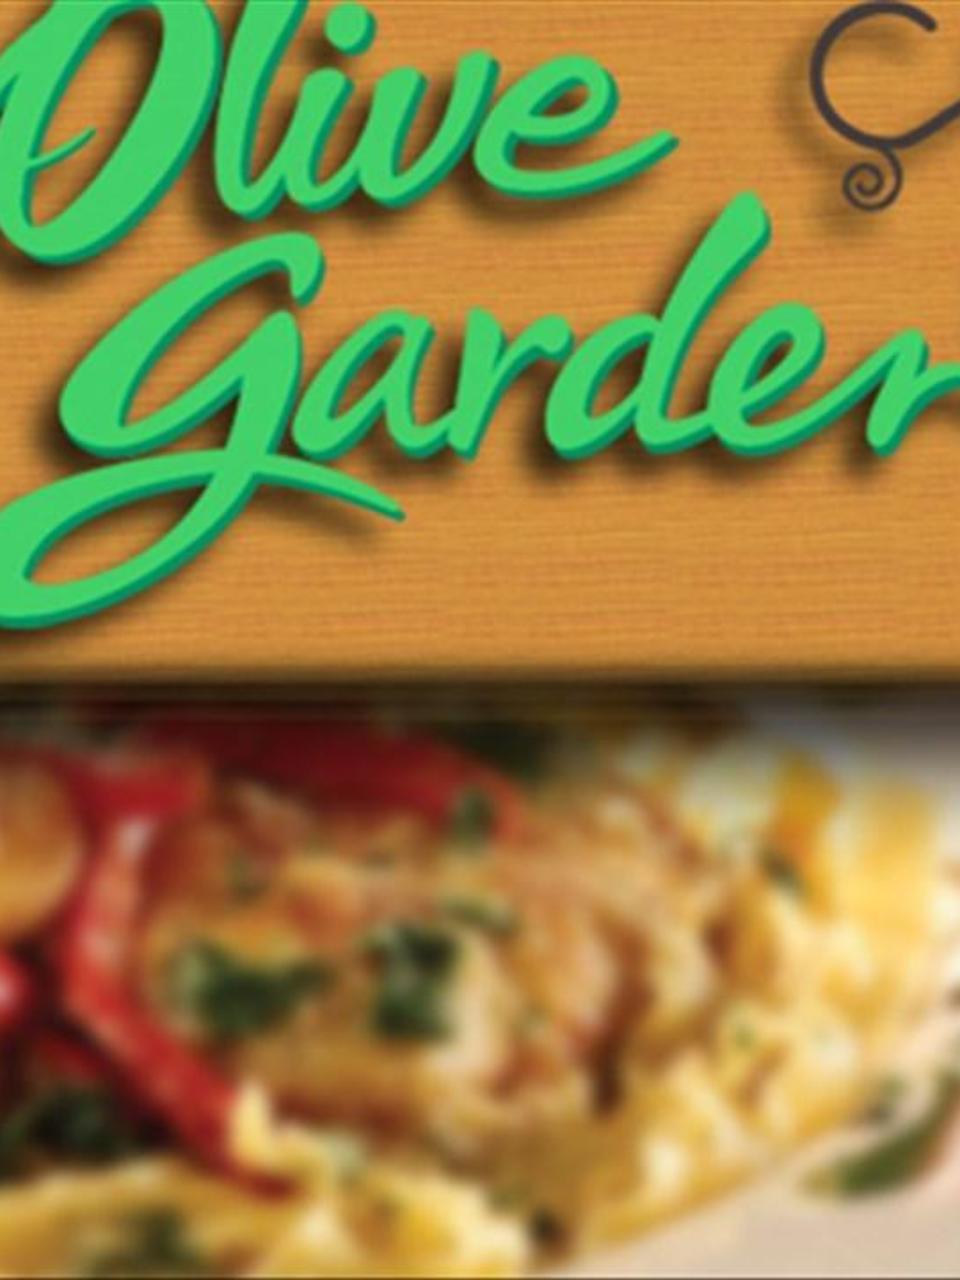 Olive Garden Now Has Zoodles Low Carb Noodles Made With